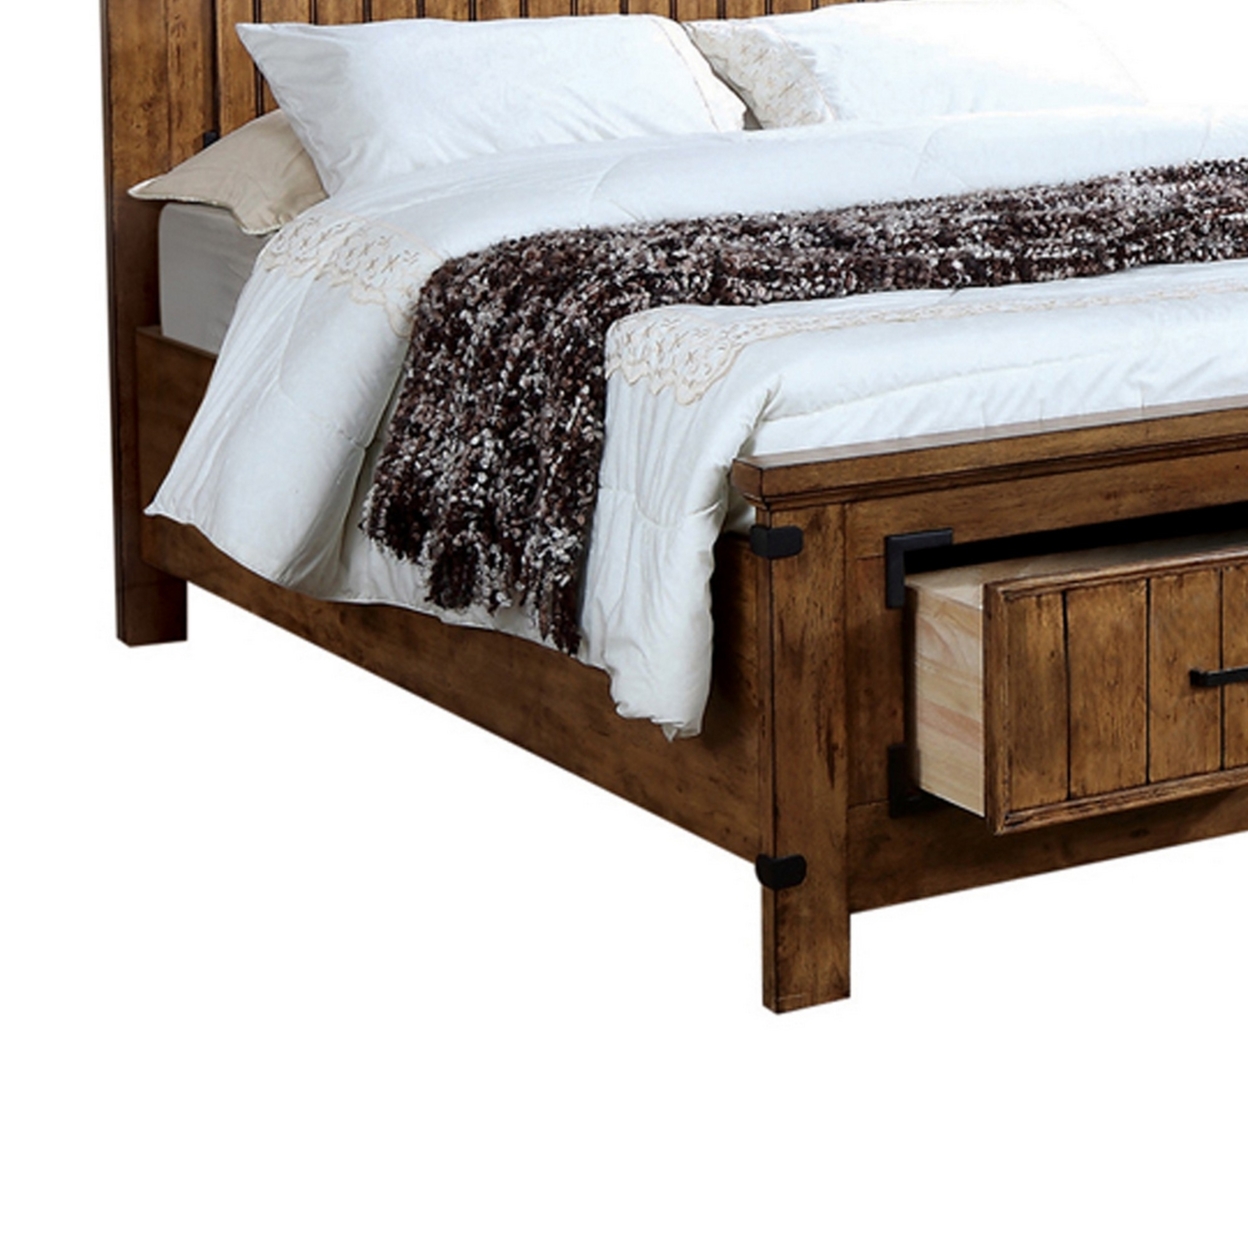 2 Drawers Queen Bed With Plank Detailing And Metal Accents, Brown- Saltoro Sherpi